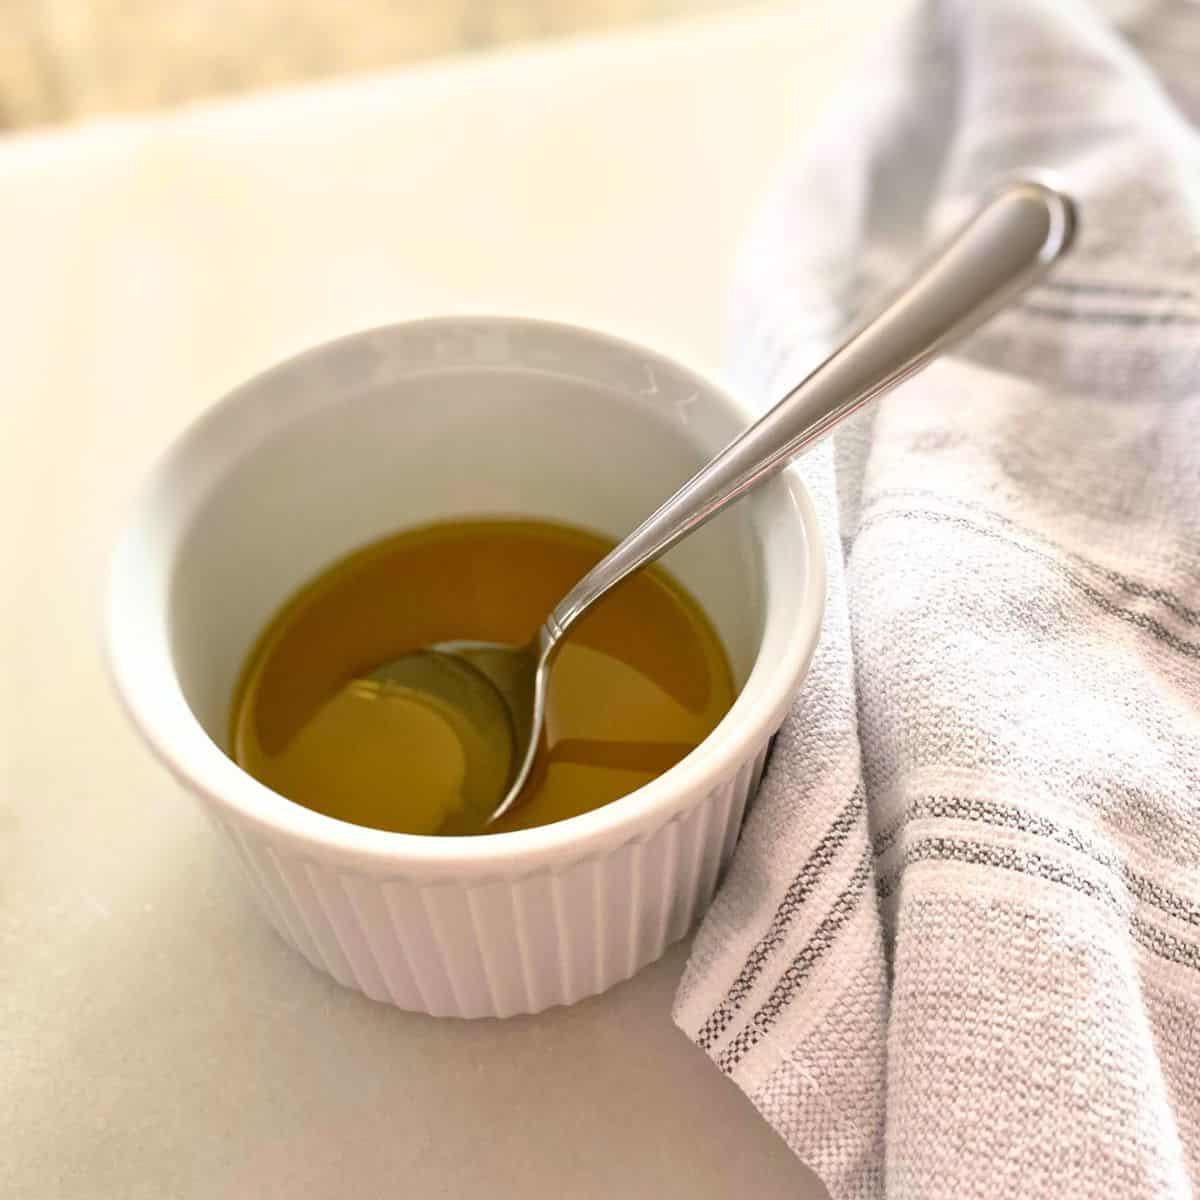 Lemon olive oil dressing in a white ramekin with a stainless steel soup spoon and a neutral cotton kitchen towel next to it